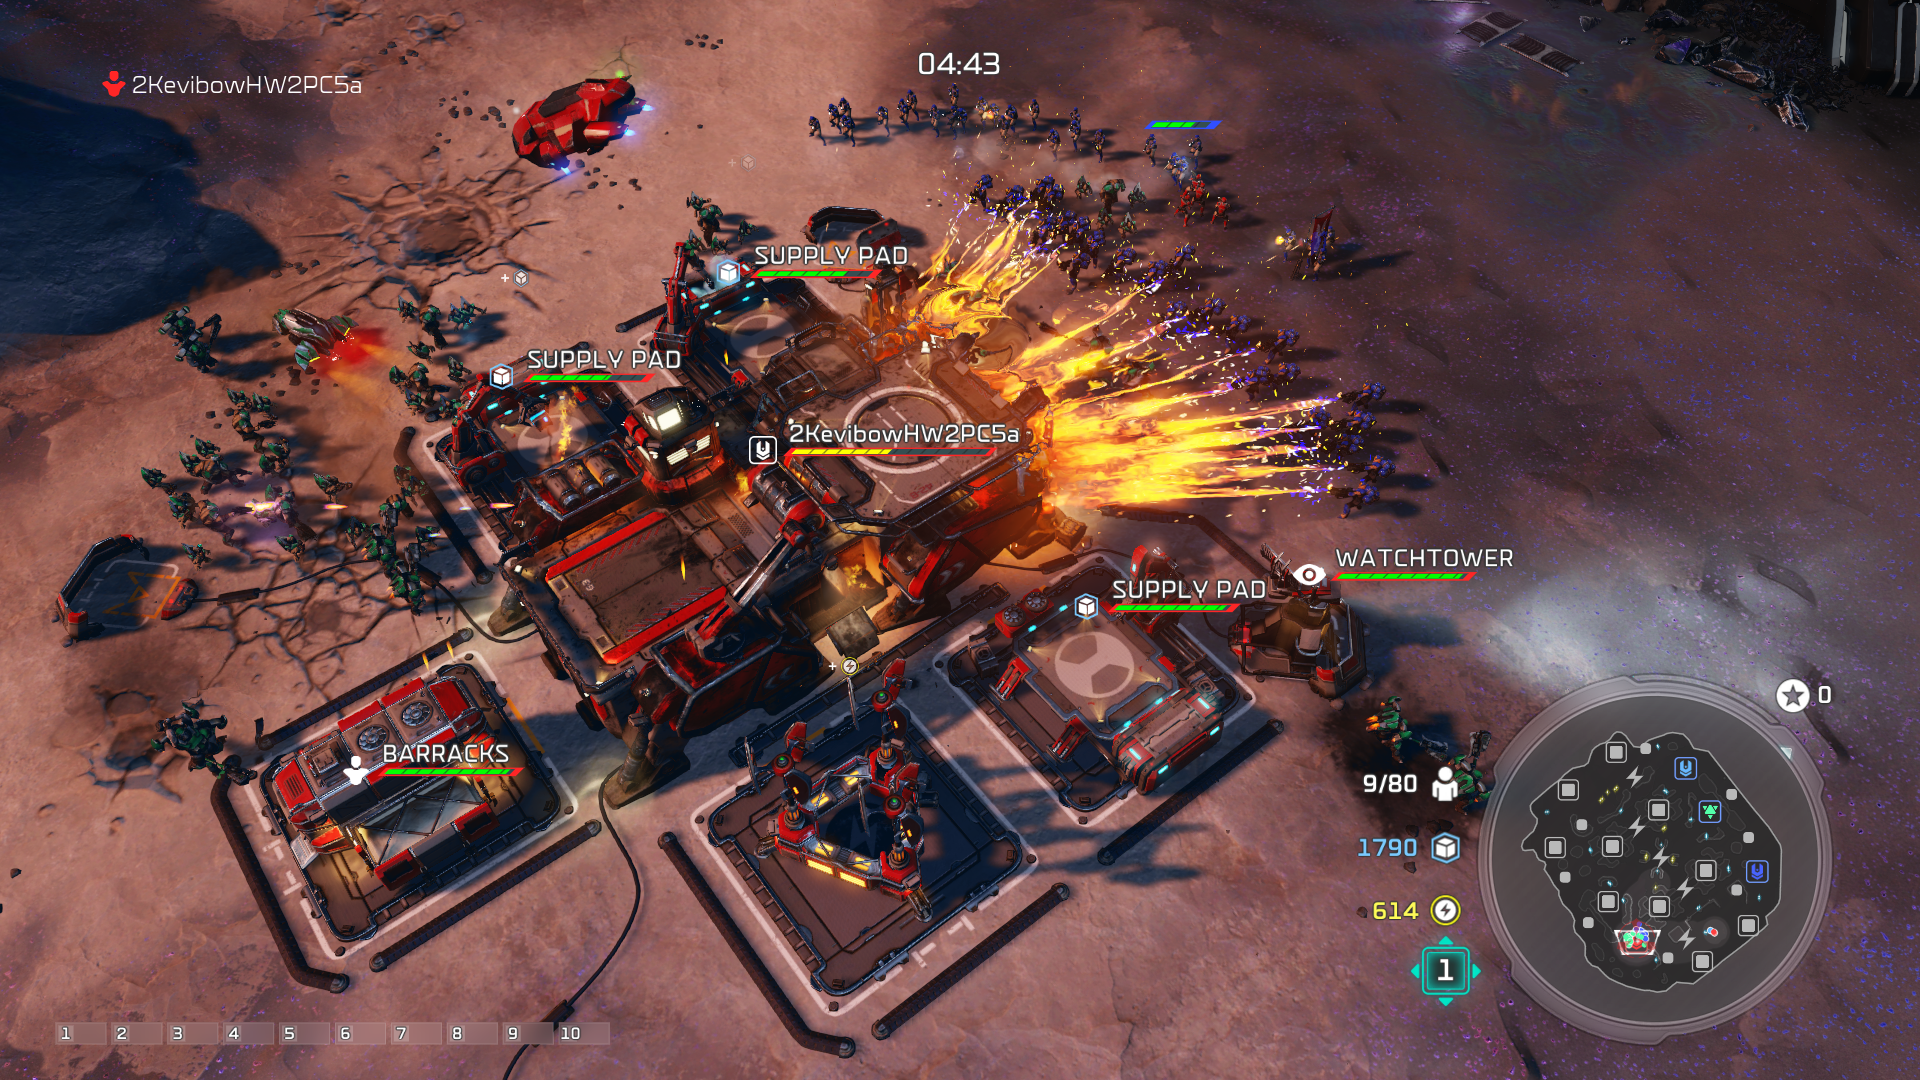 Halo Wars 2 MP Ashes Firebase on Fire